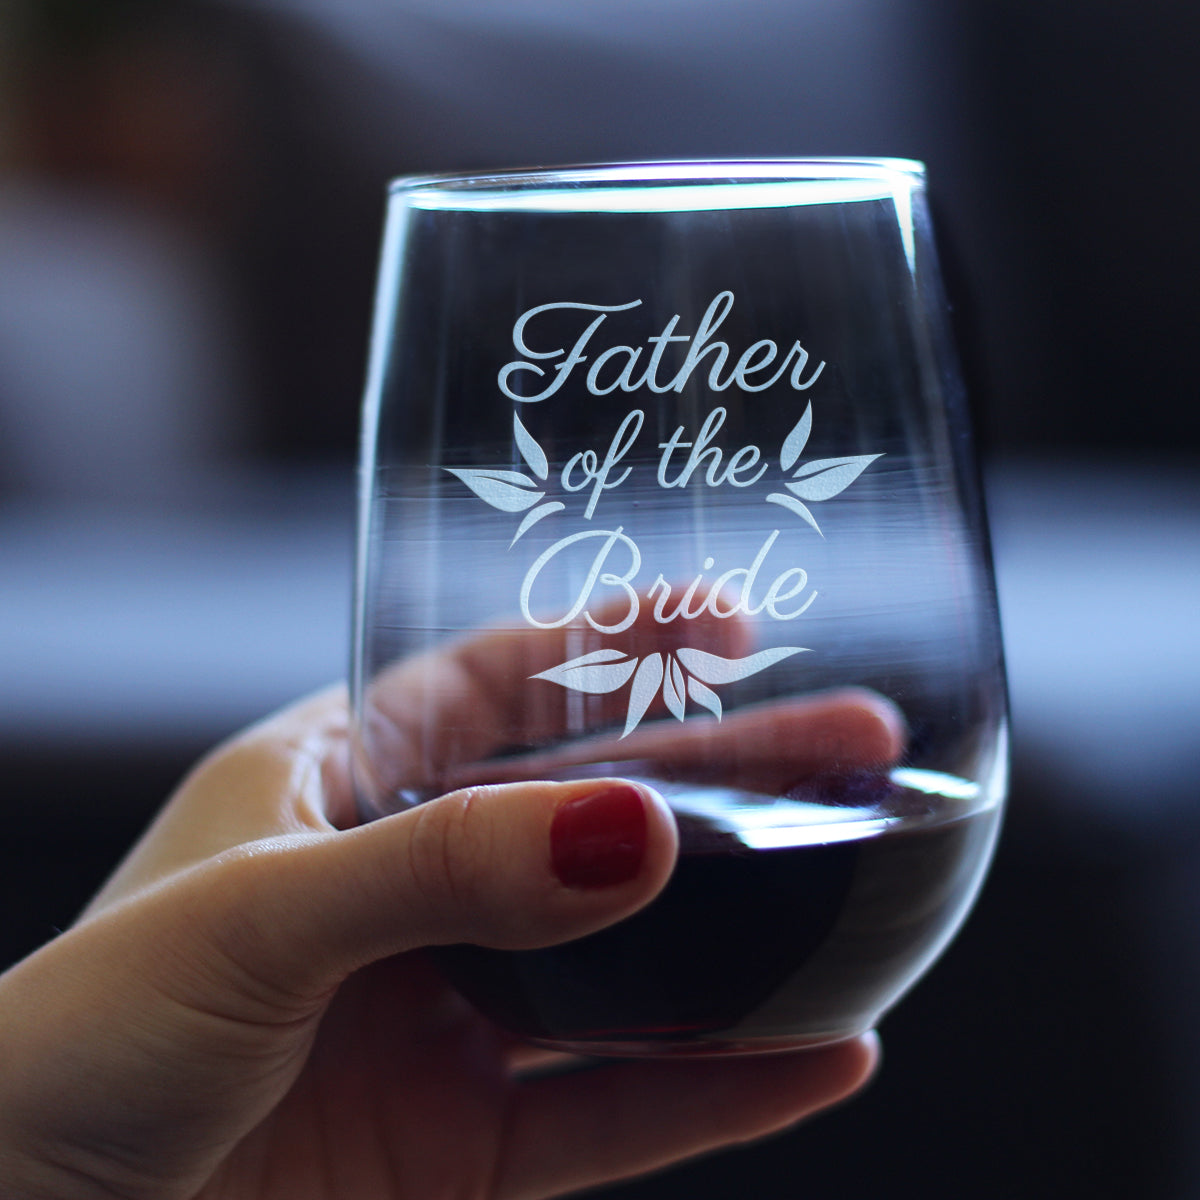 Father of the Bride Stemless Wine Glass - Unique Wedding Gift for Soon to be Father-in-Law - Cute Engraved Wedding Cup Gift